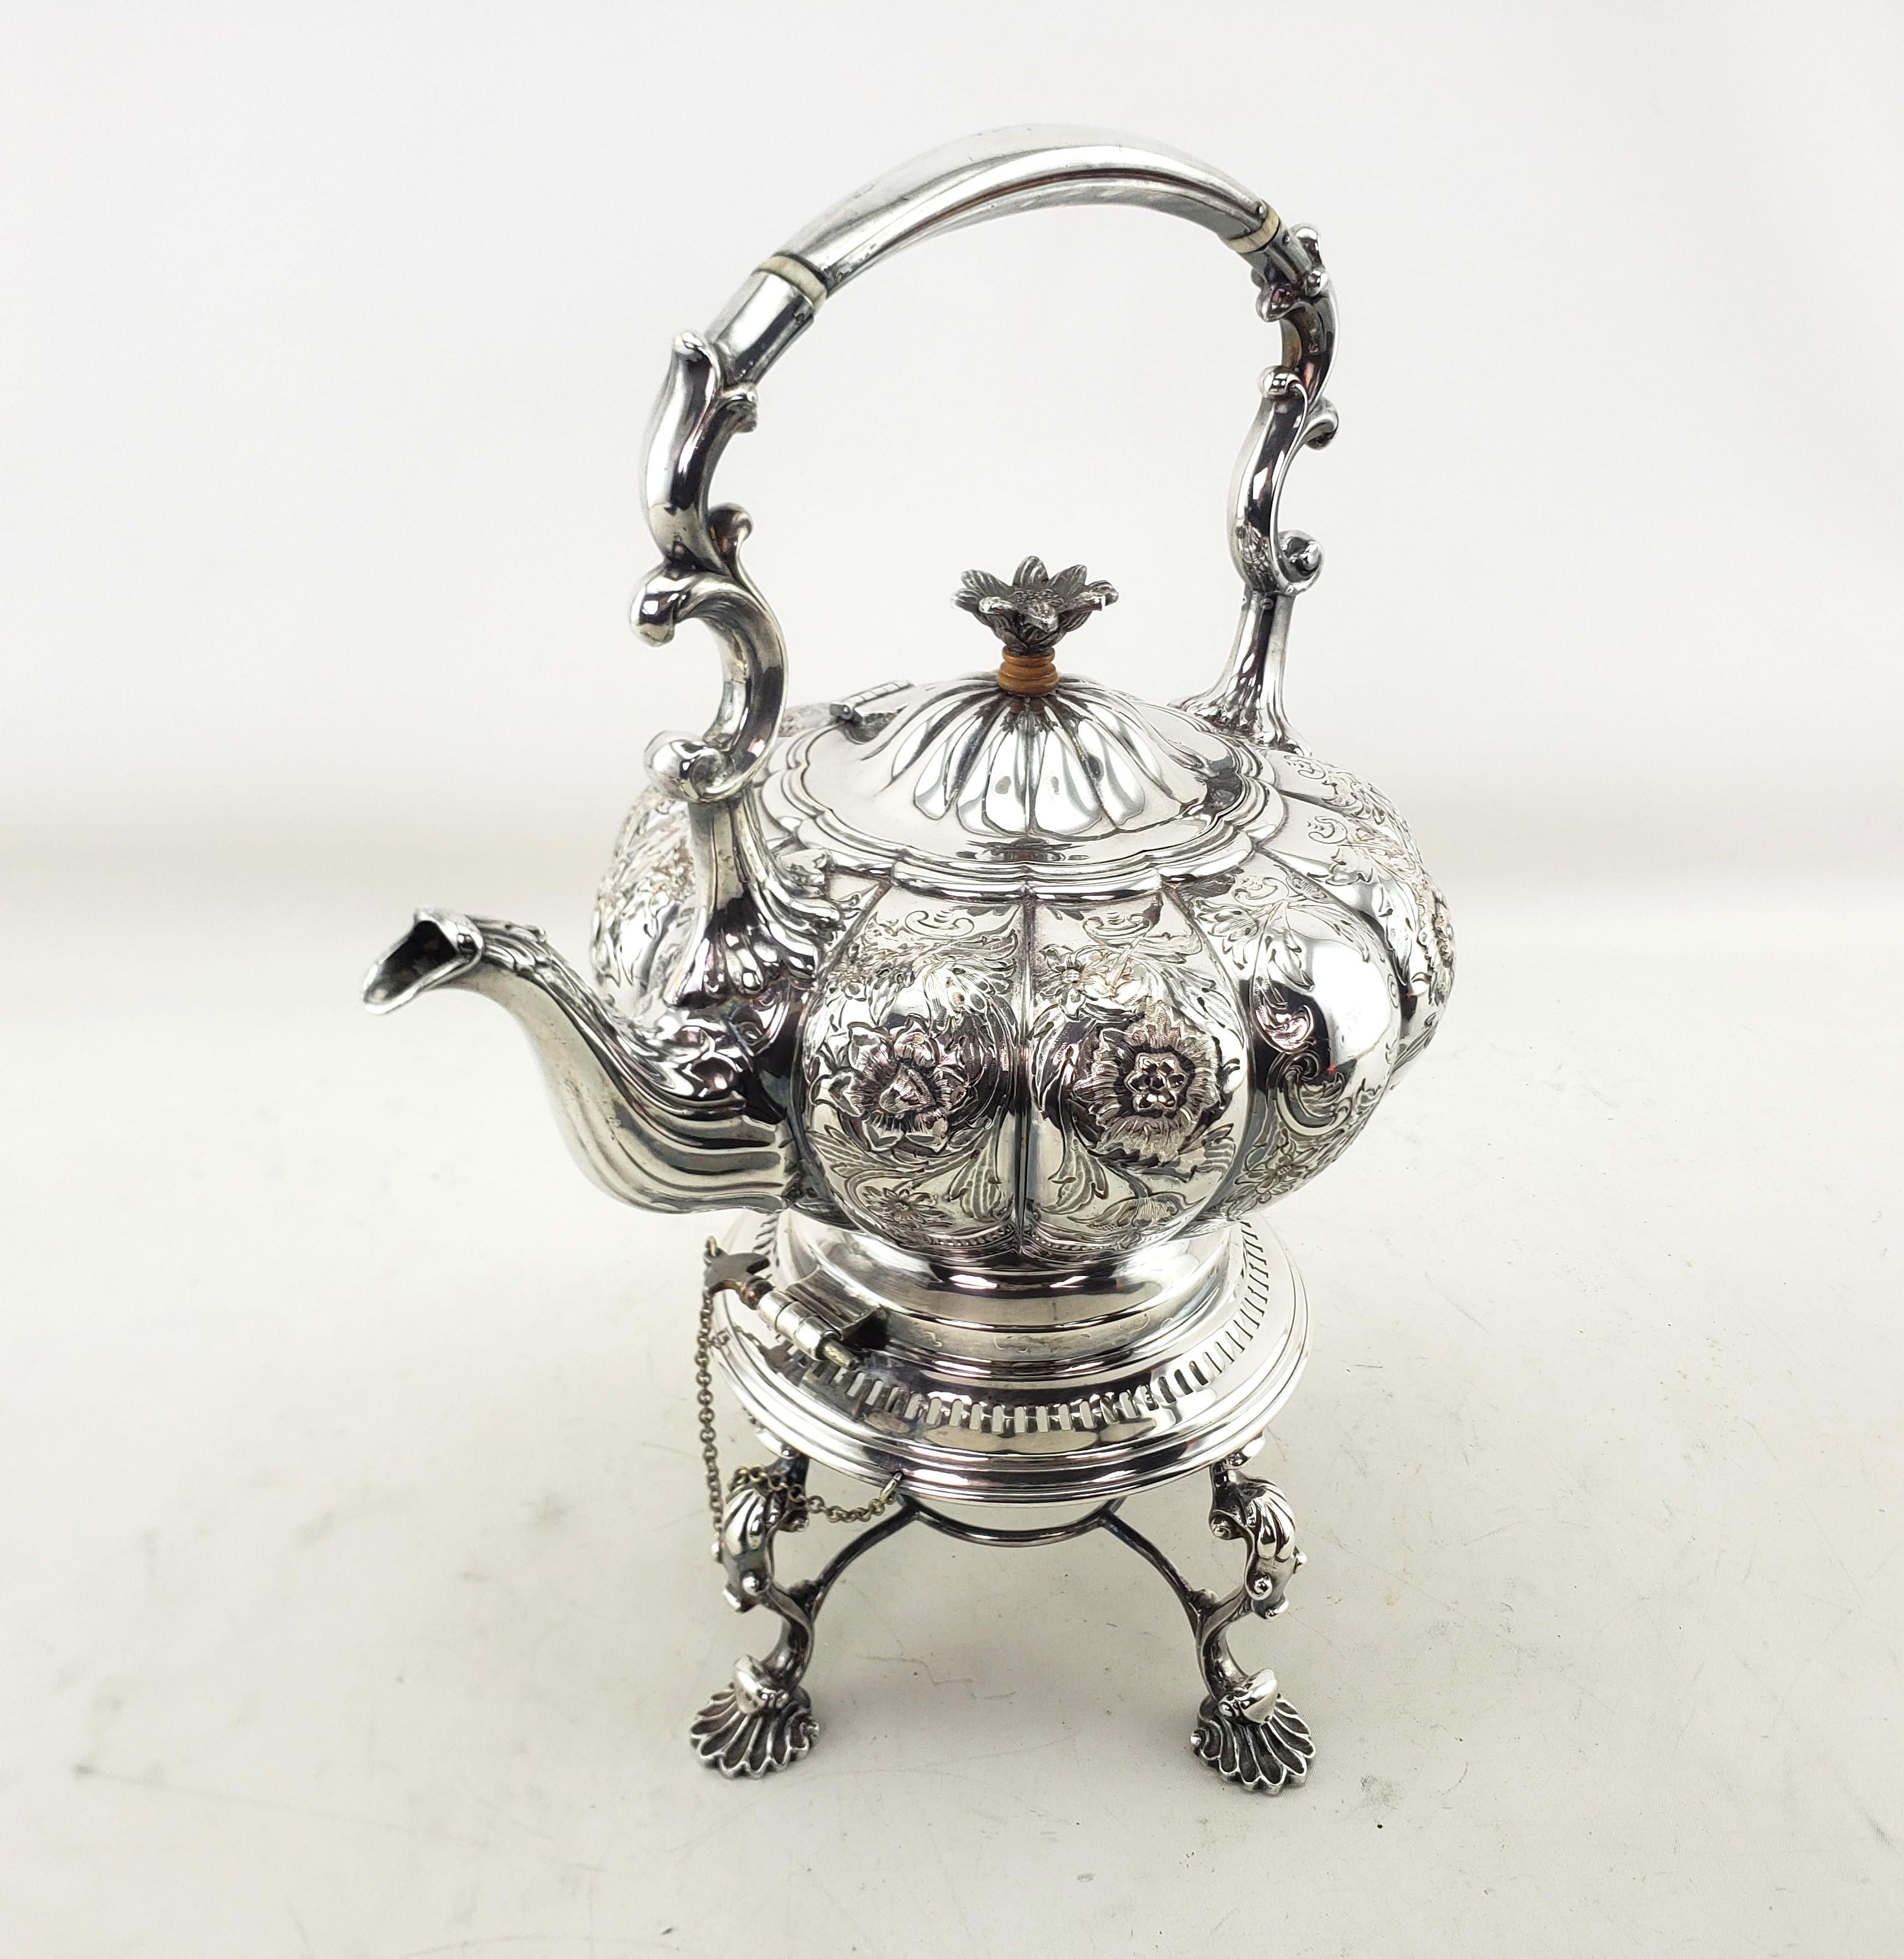 Art Nouveau Antique English Silver Plated Tipping Hot Water Kettle with Chased Floral Motif For Sale